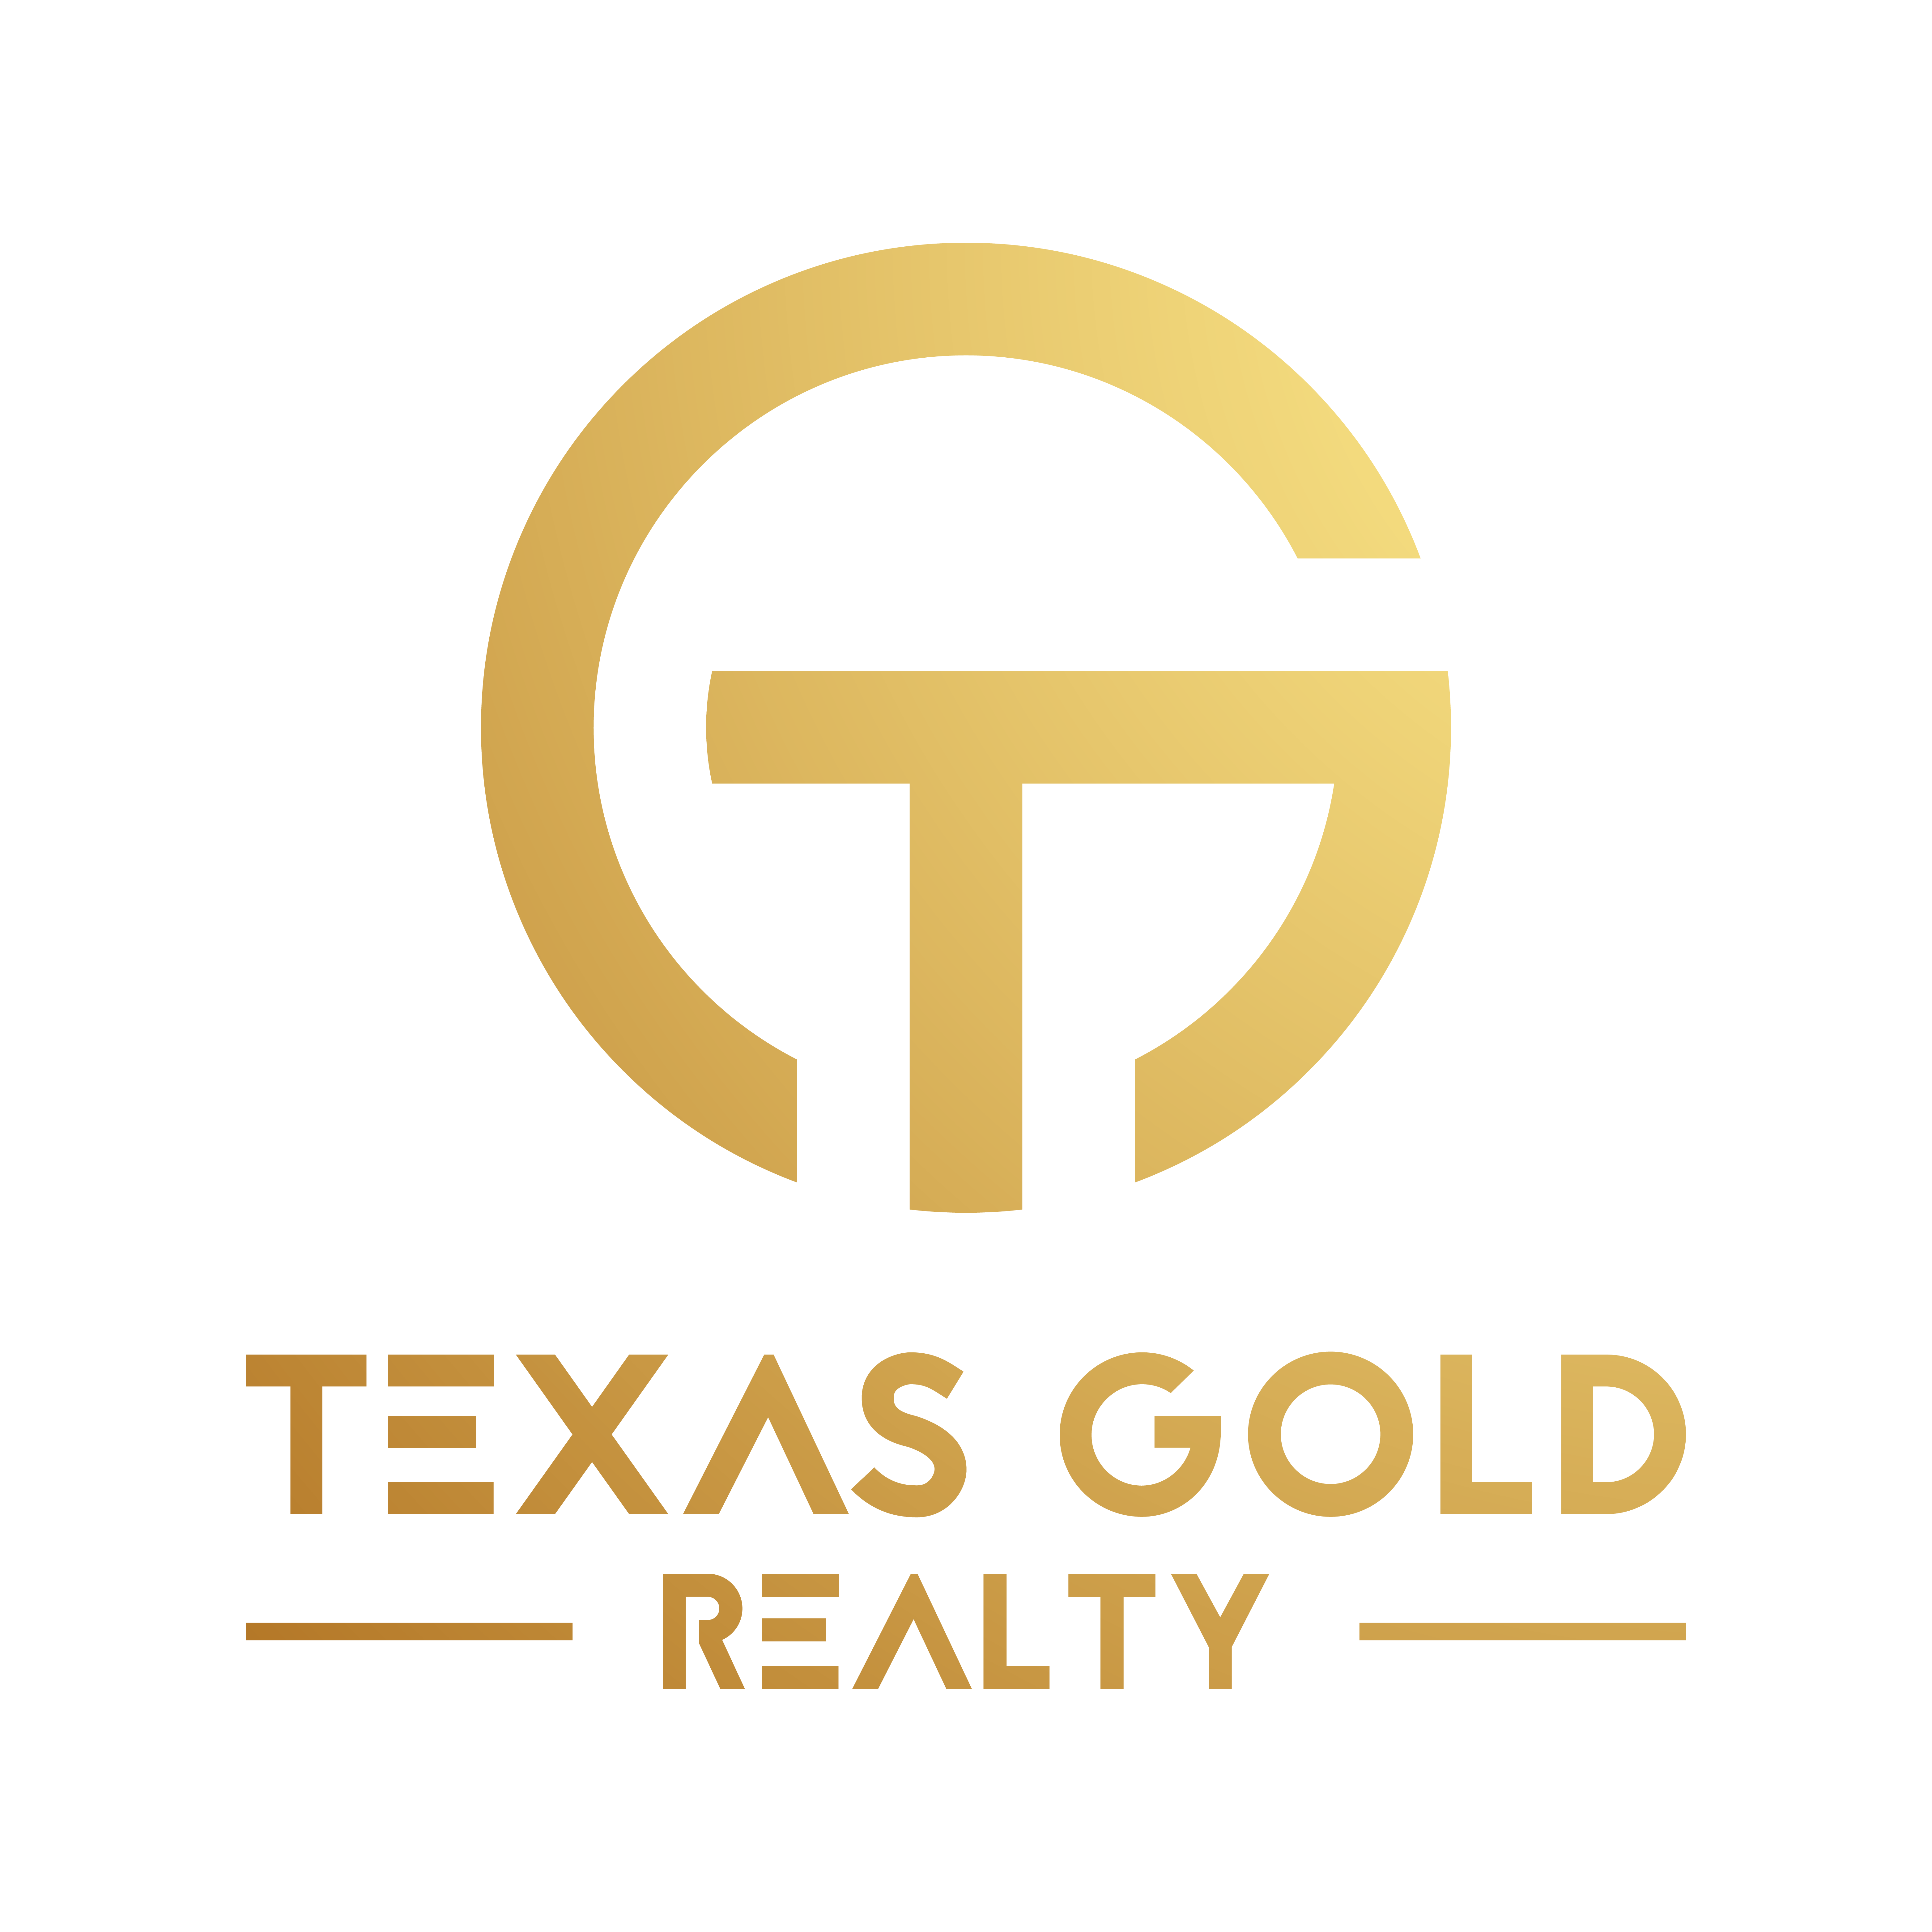 TEXAS GOLD REALTY